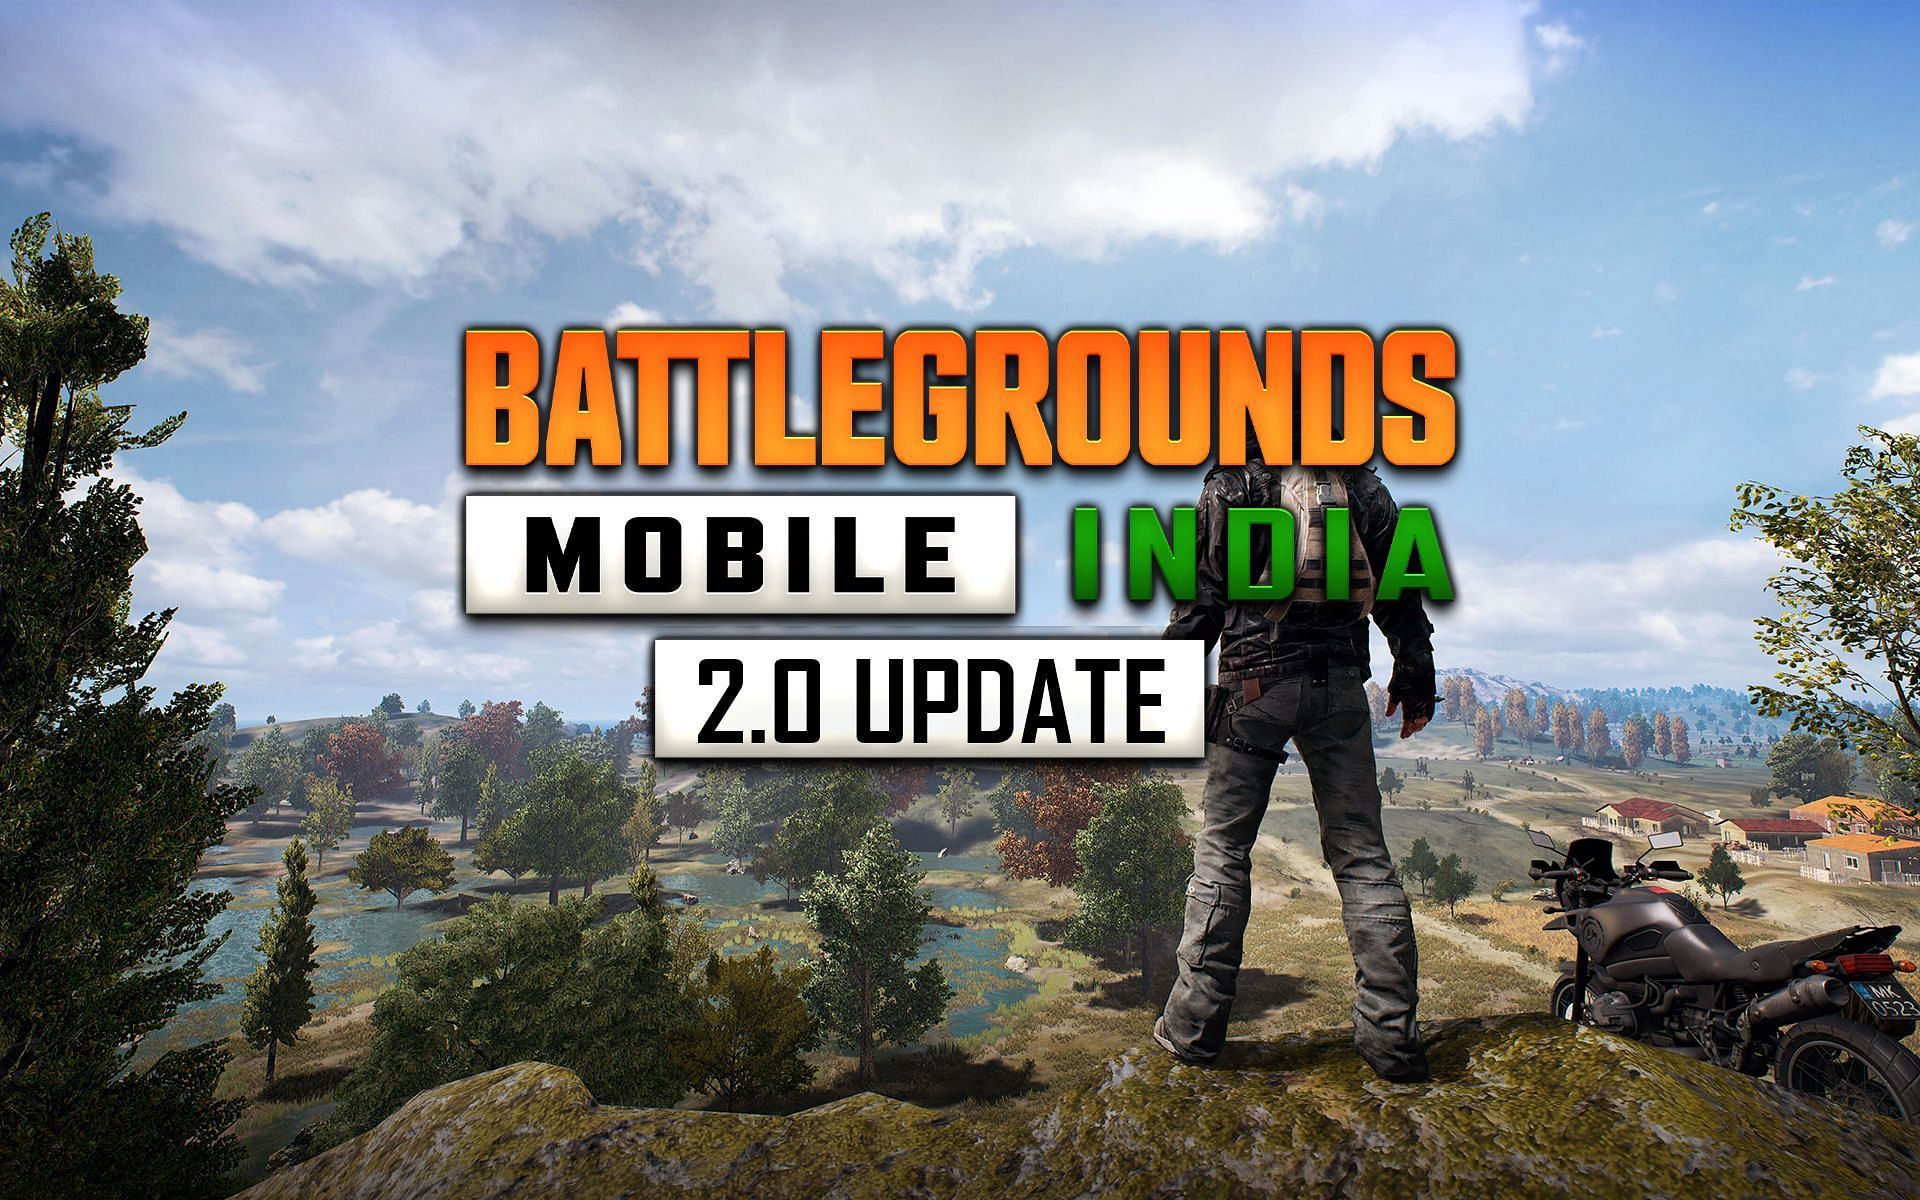 BGMI players and fans all around the country are eagerly waiting to play the 2.0 update (Image via Sportskeeda)